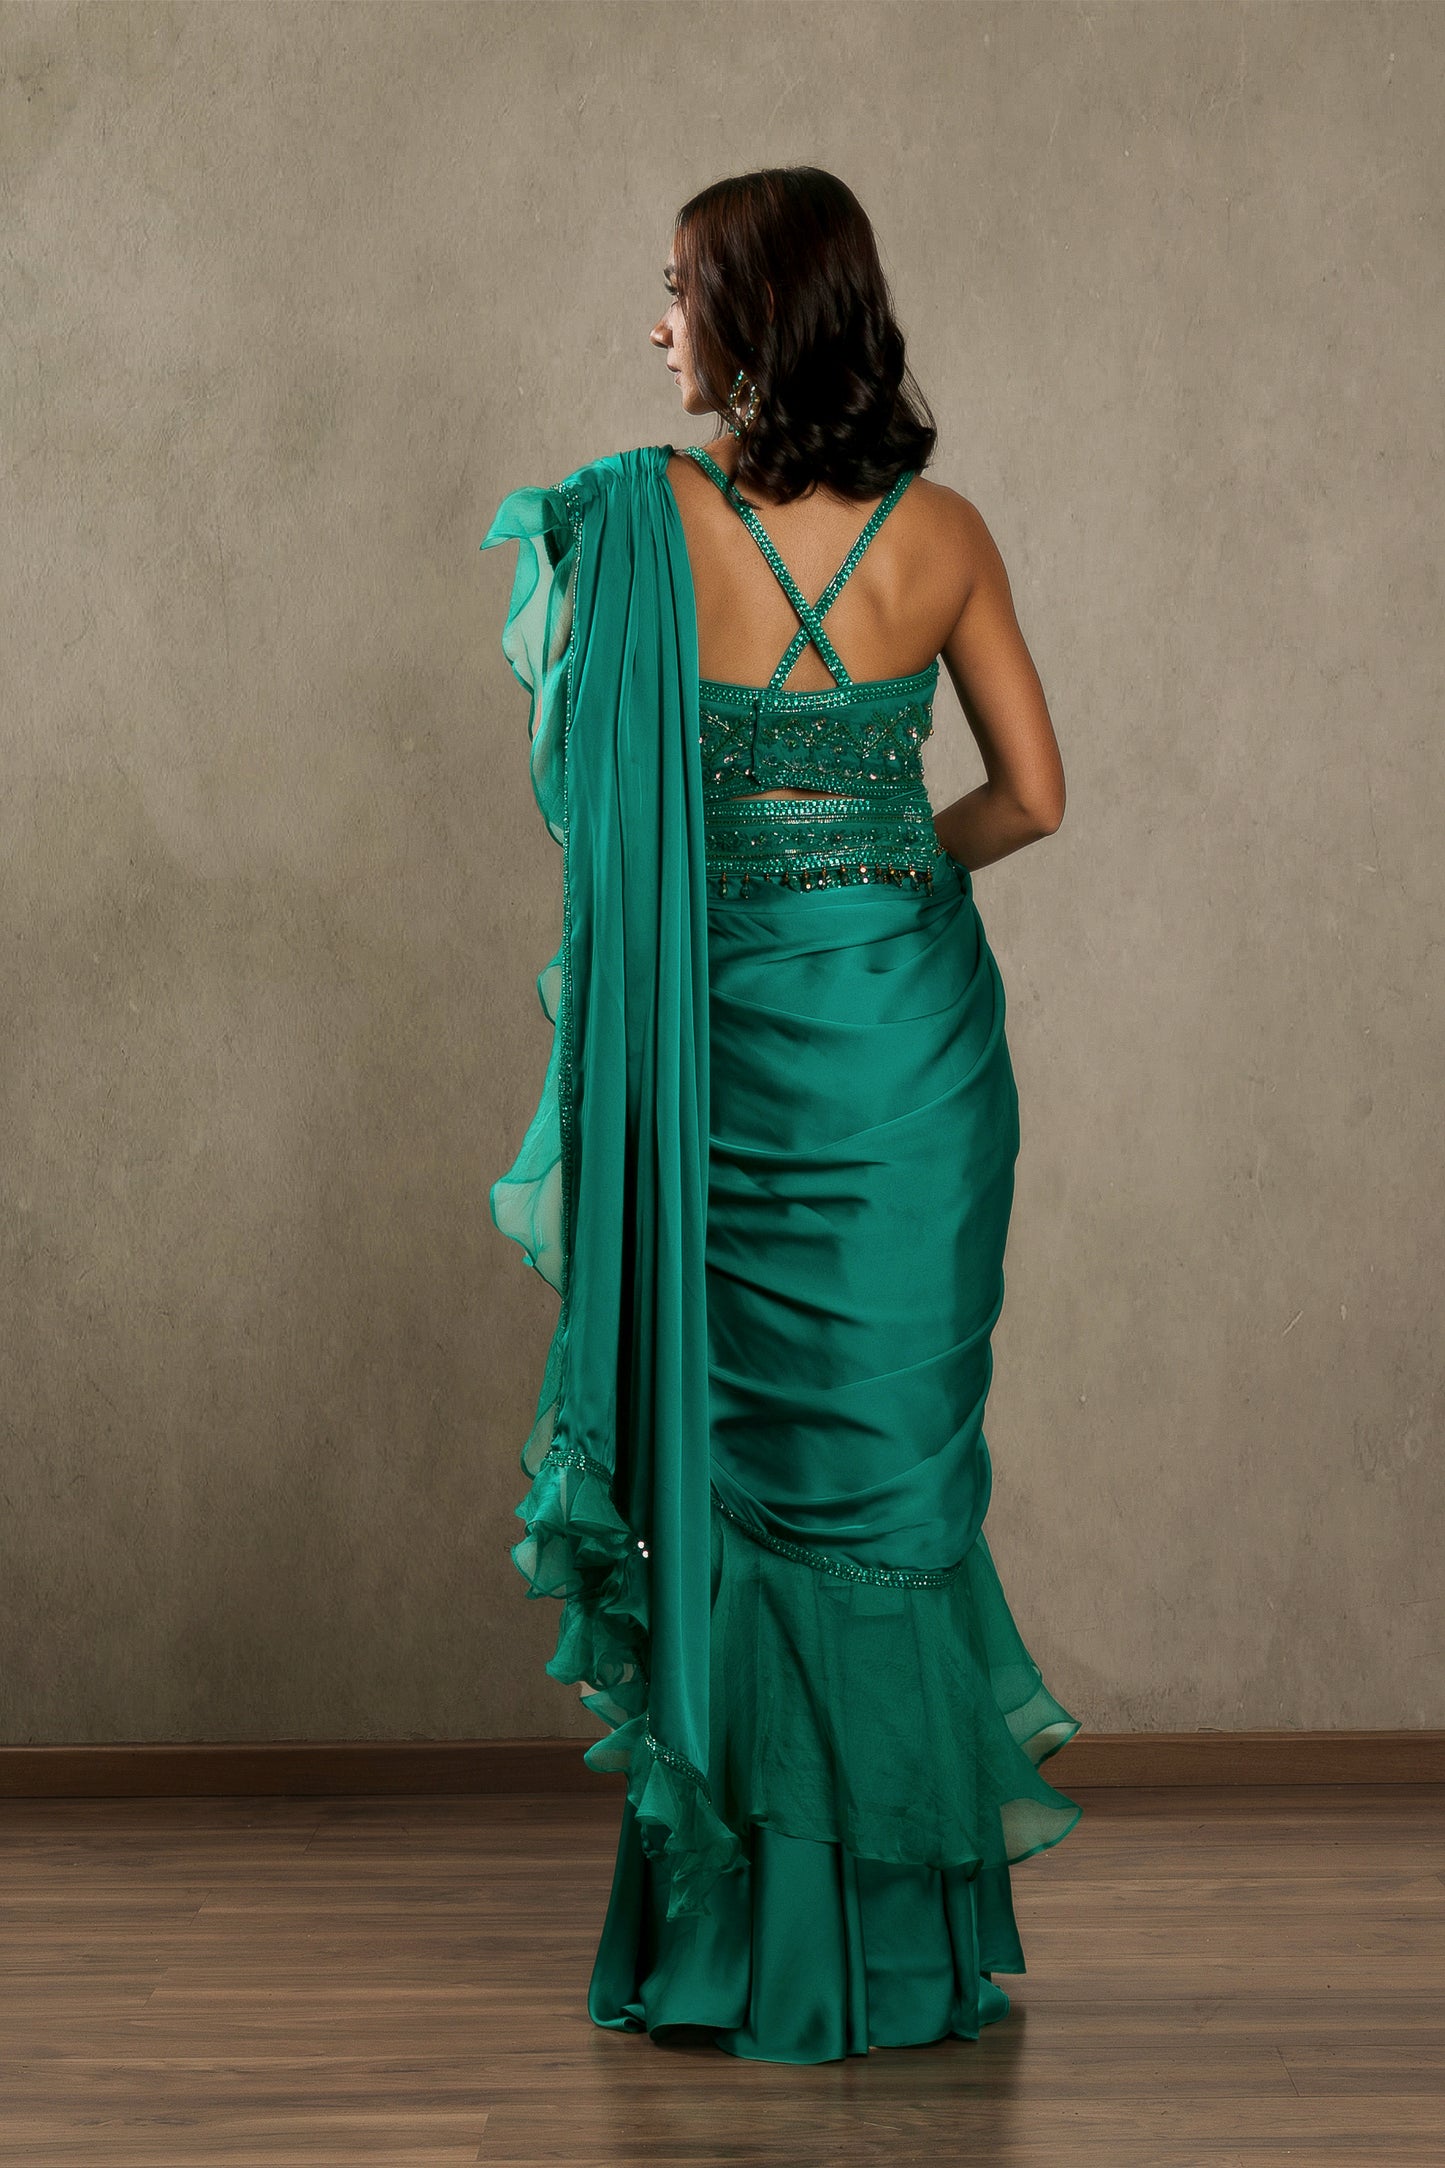 Satin Organza Concept Saree Paired With Embellished Halter Blouse And Belt